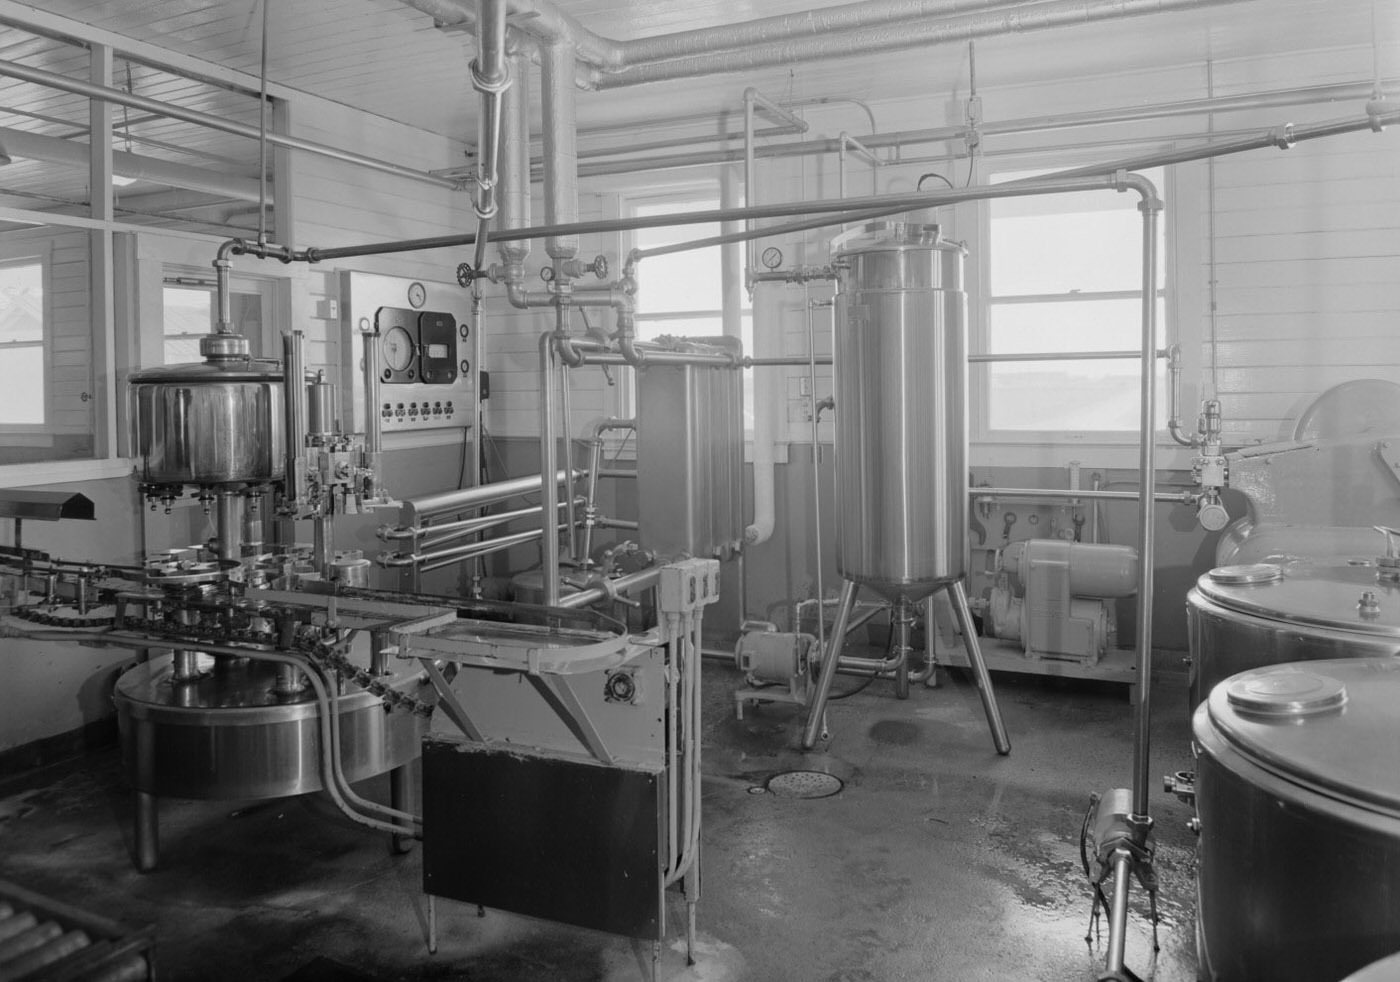 Interior of Hillcrest Farms with Dairy Equipment, 1957.